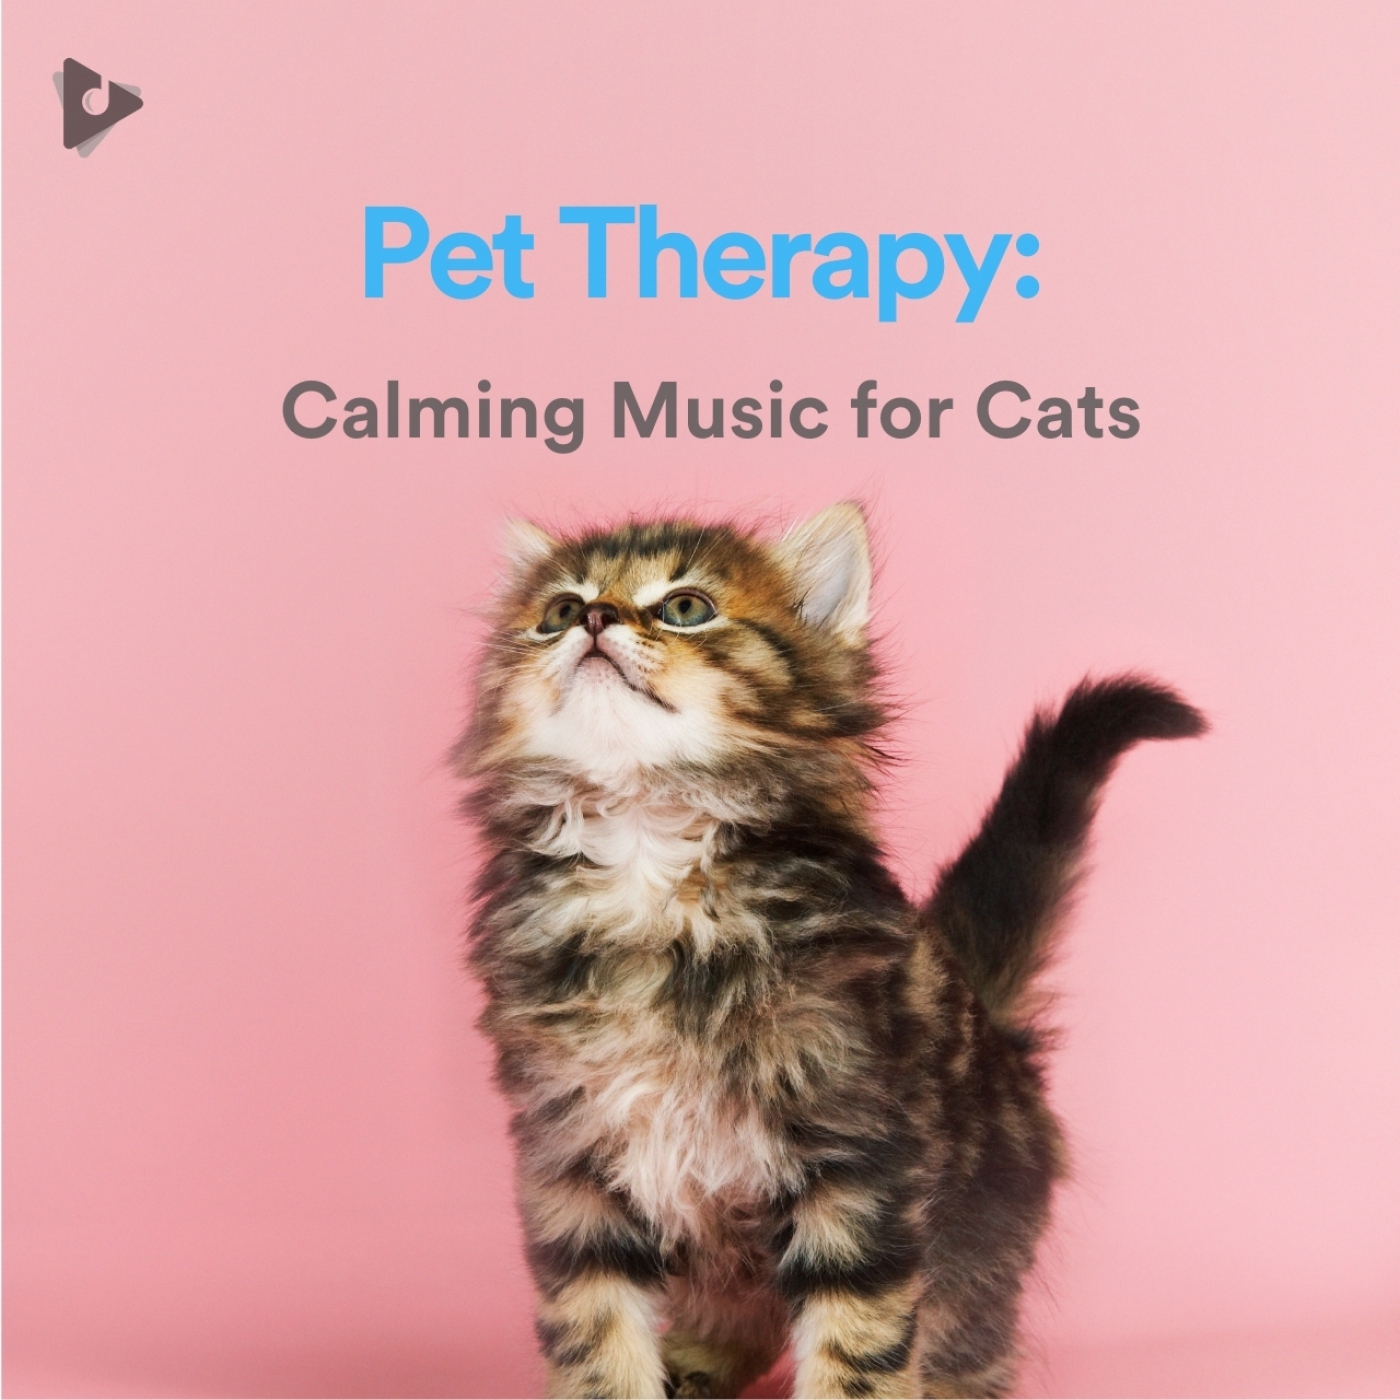 Pet Therapy: Calming Music for Cats